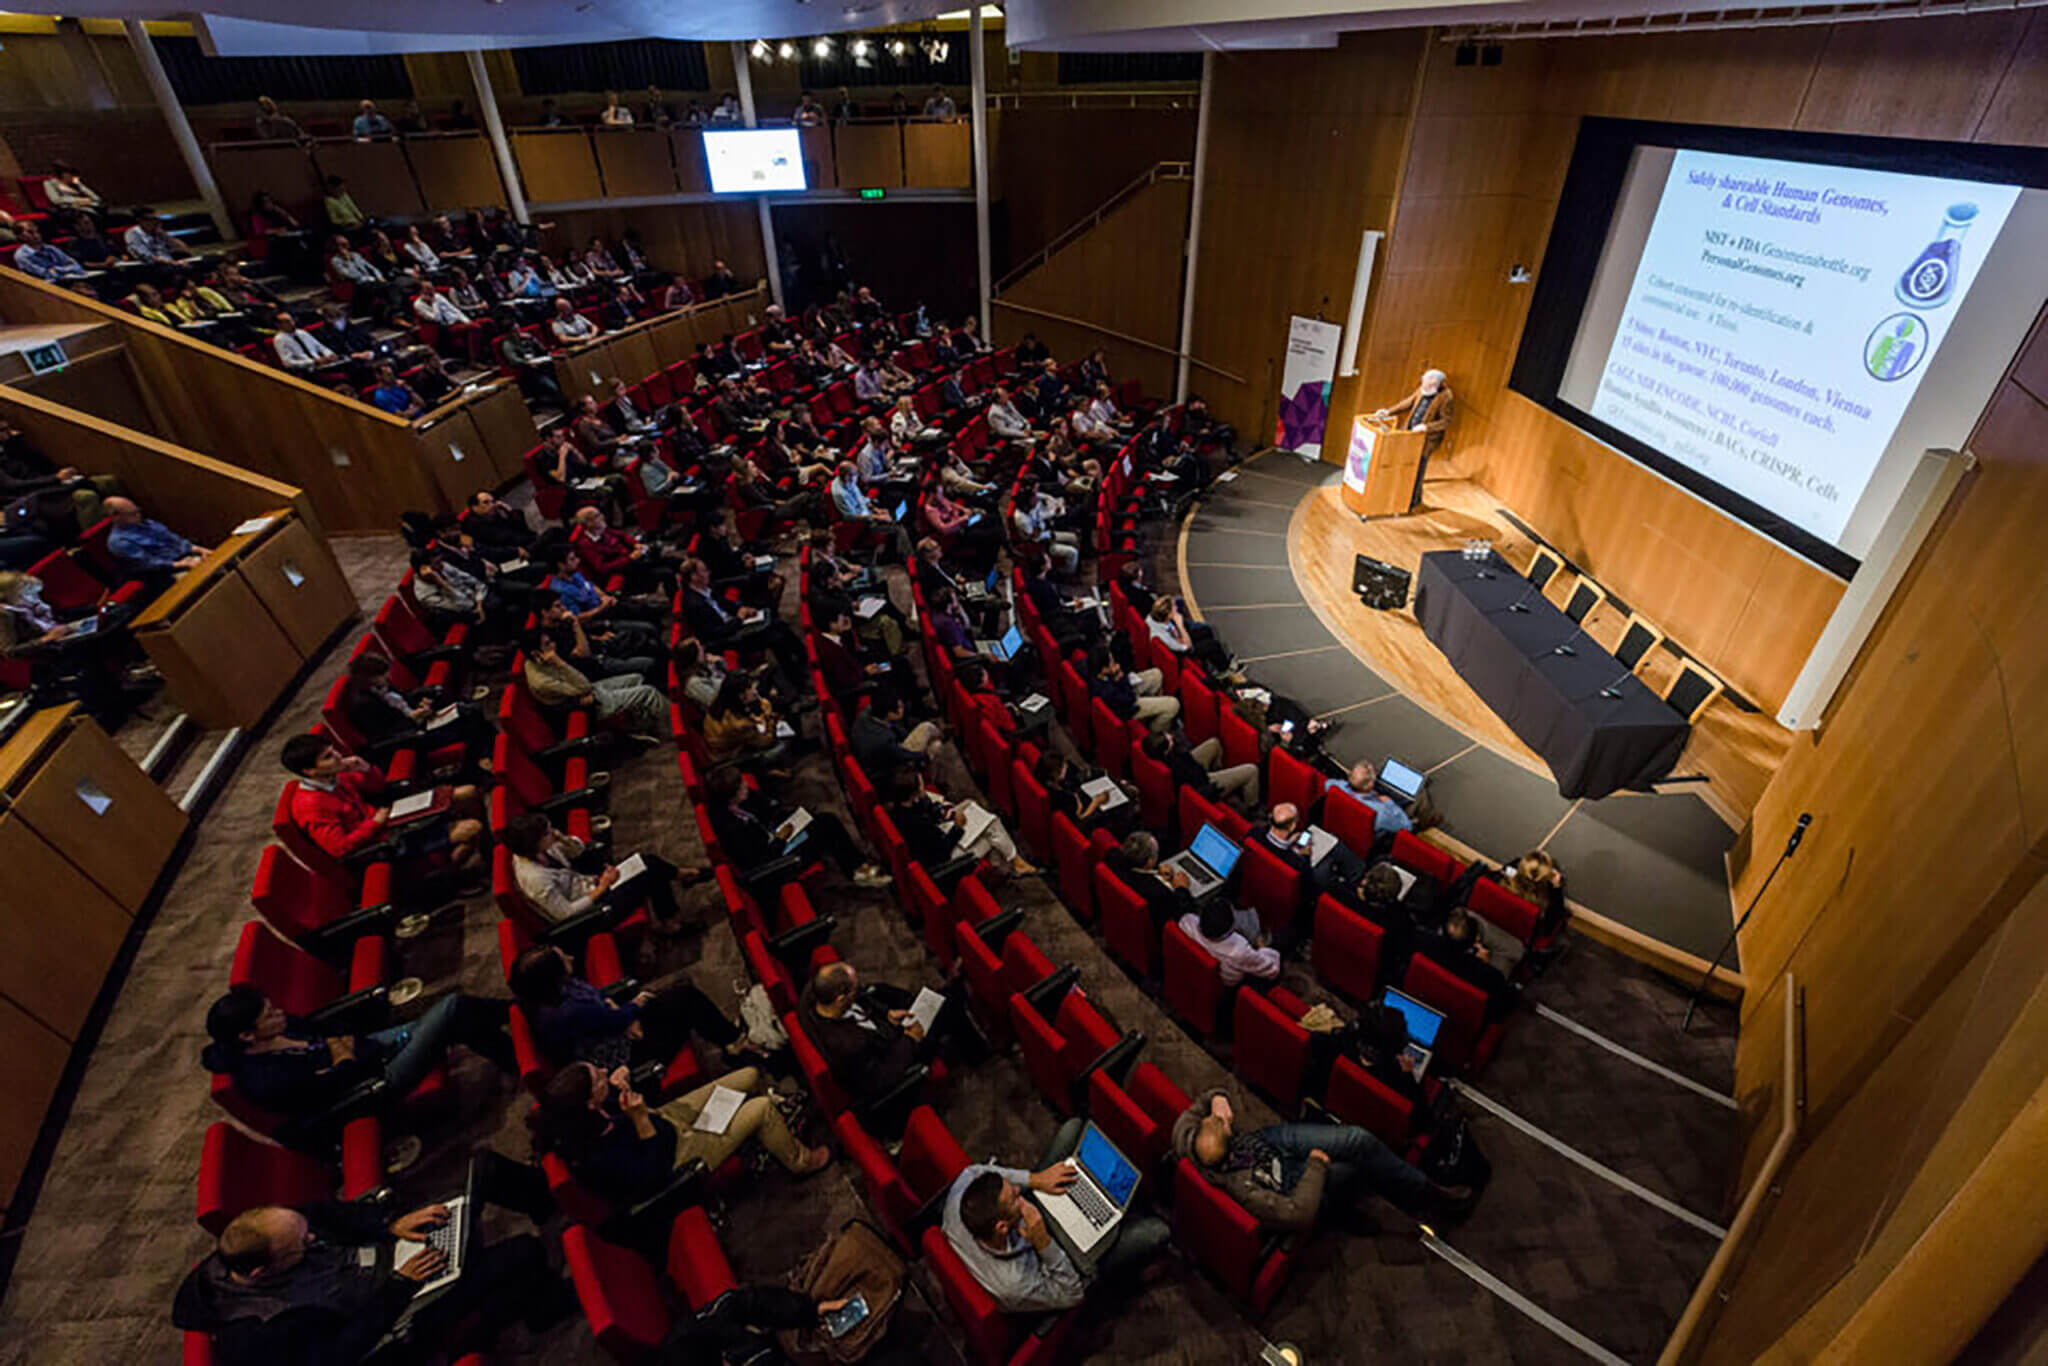 Photograph of conference session in the Conference Centre auditorium